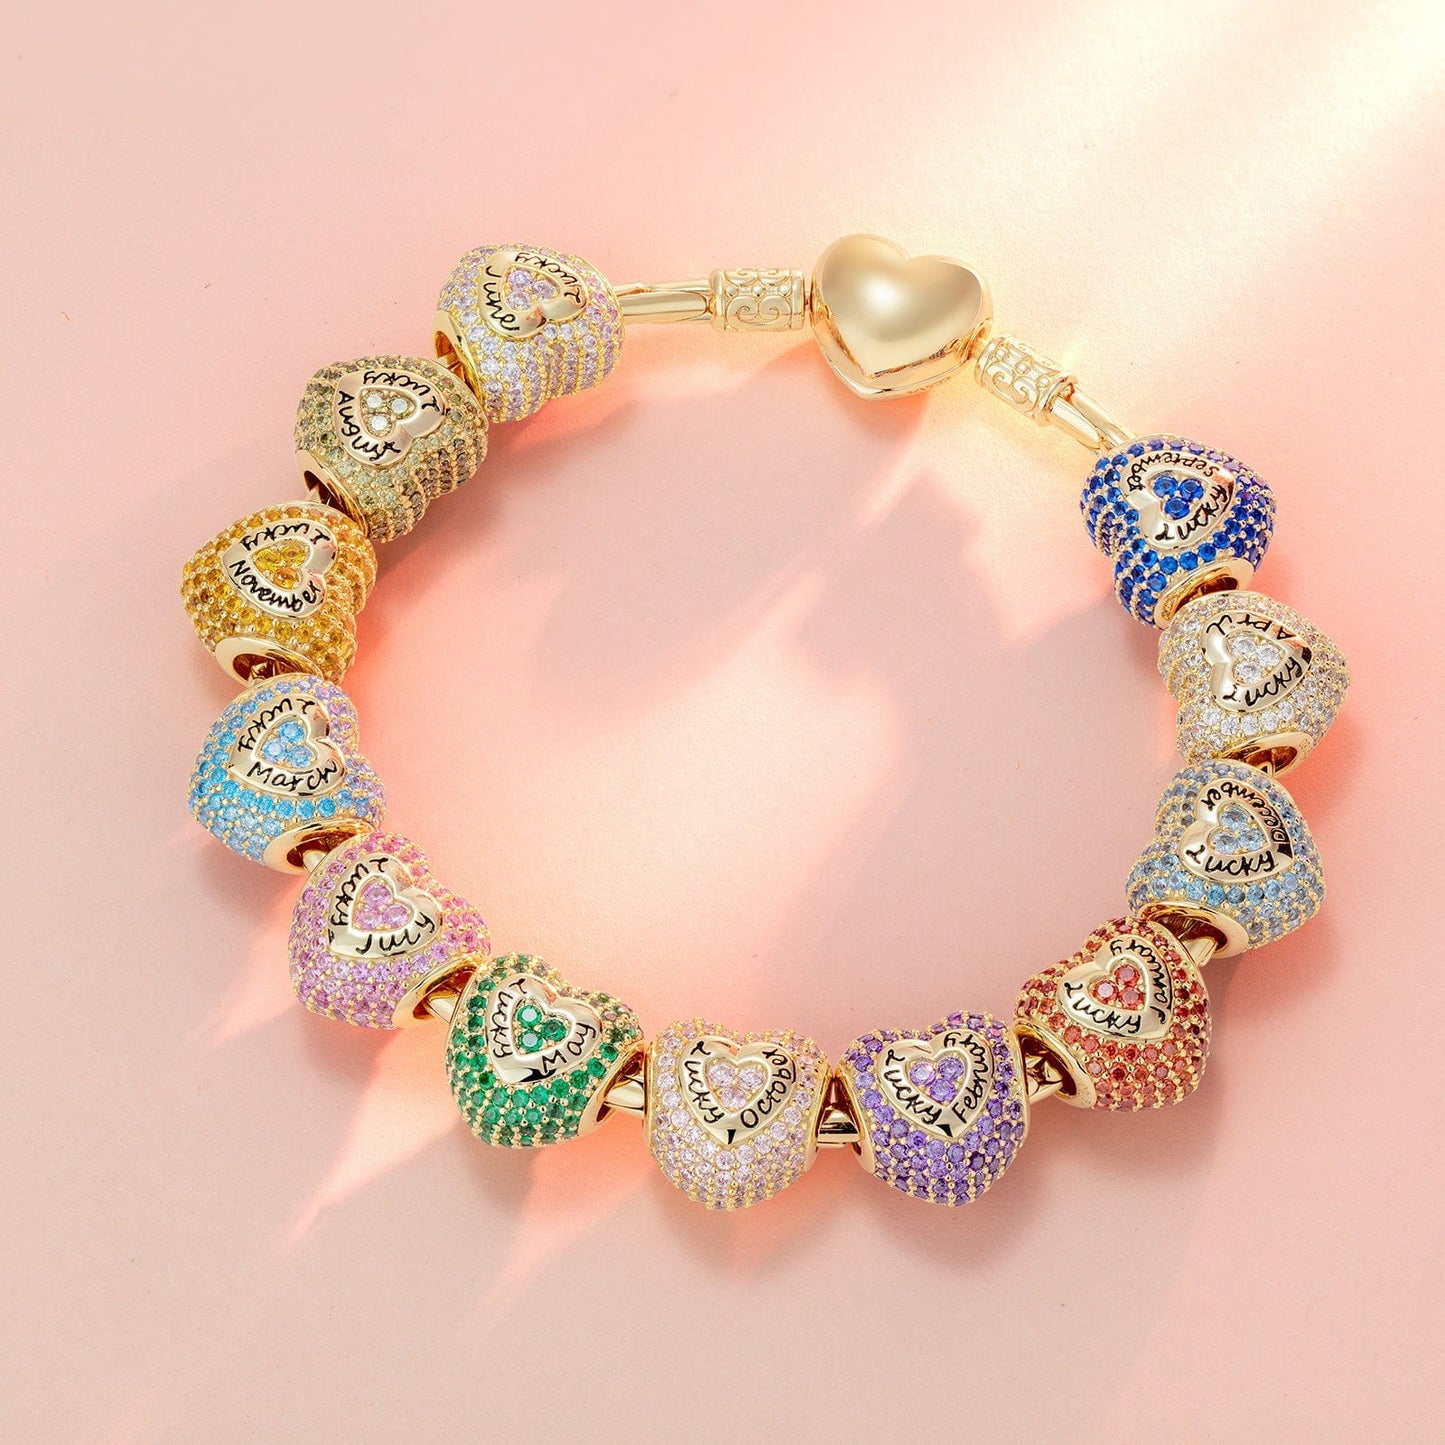 November Love Heart Birthstone Tarnish-resistant Silver Charms With Enamel In 14K Gold Plated